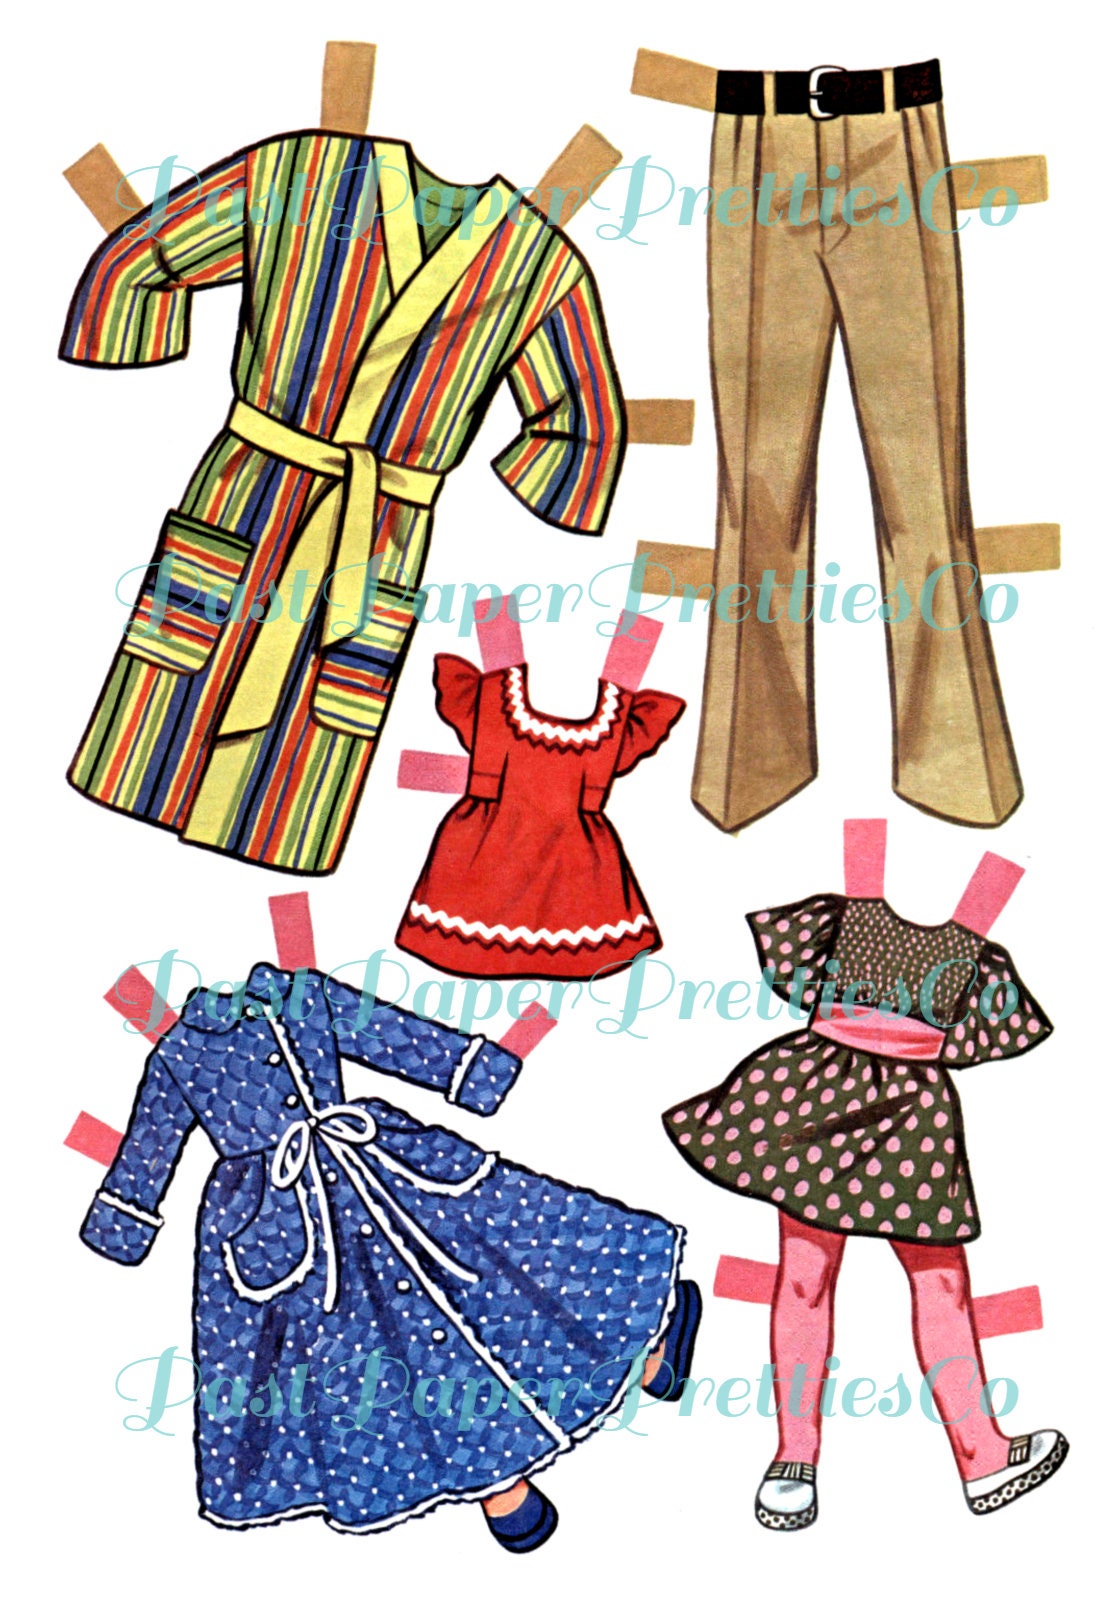  Grandma's Cut-Out Paper Dolls Book: 20 Models and 200 Vintage  Clothing Accessories to Dress in Full Color 60s, 70s and 80s Dolls of the  childhood of  Book (70s and 80s